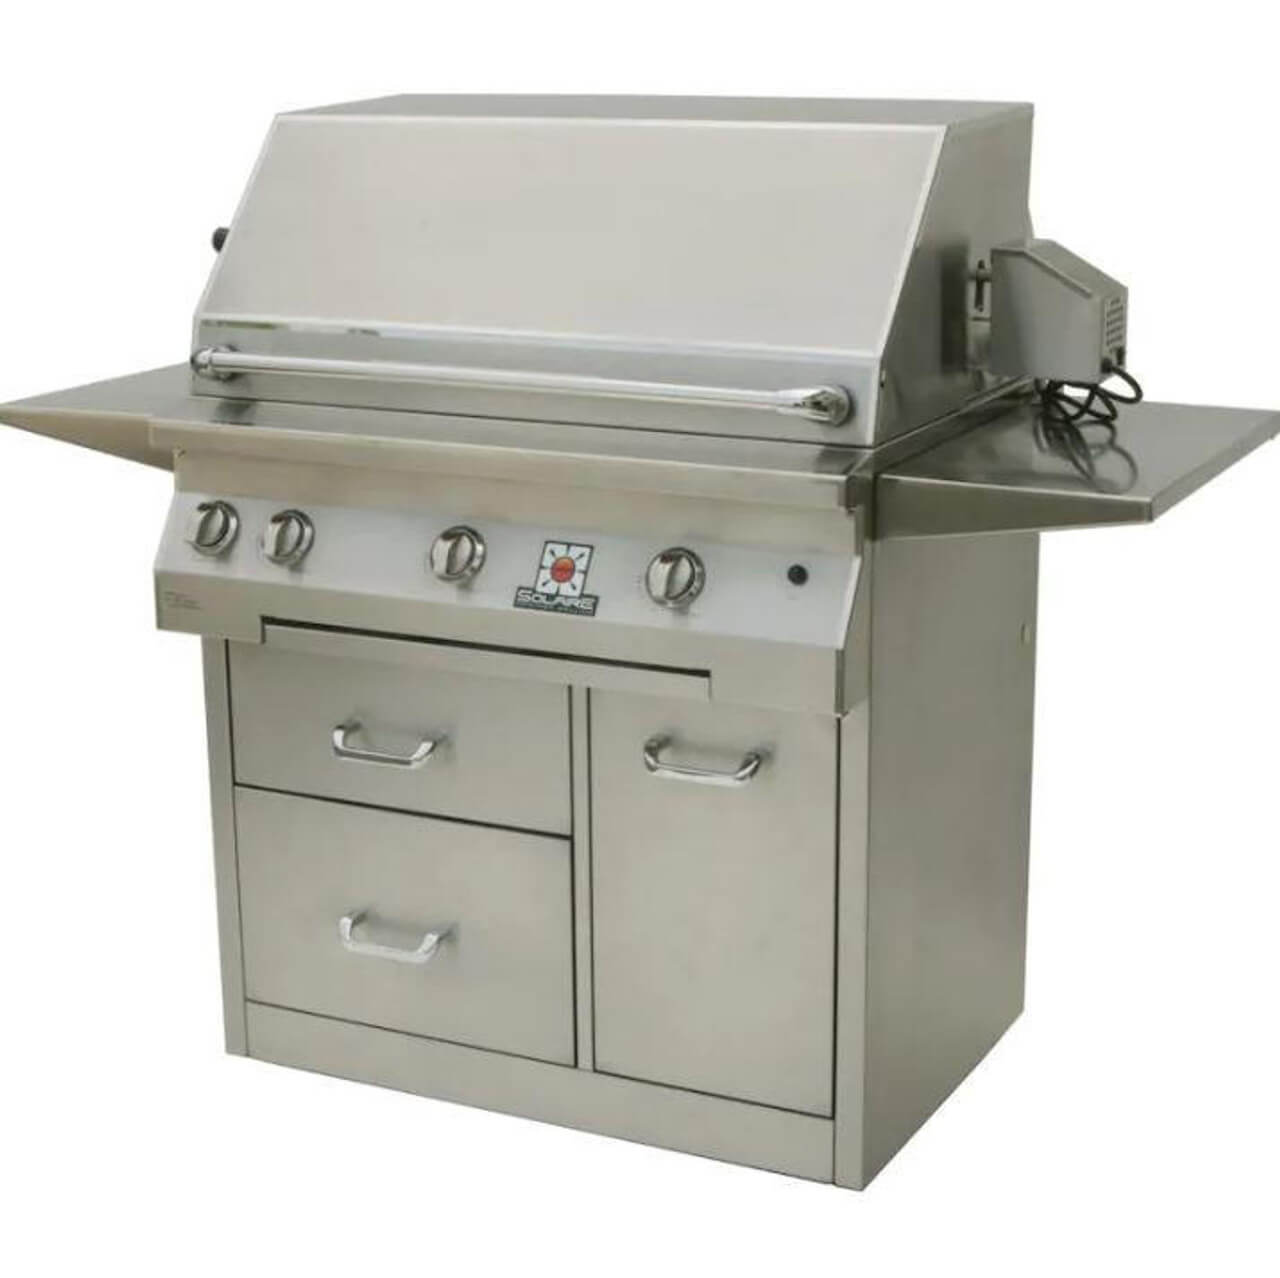 Solaire steel propane gas grill